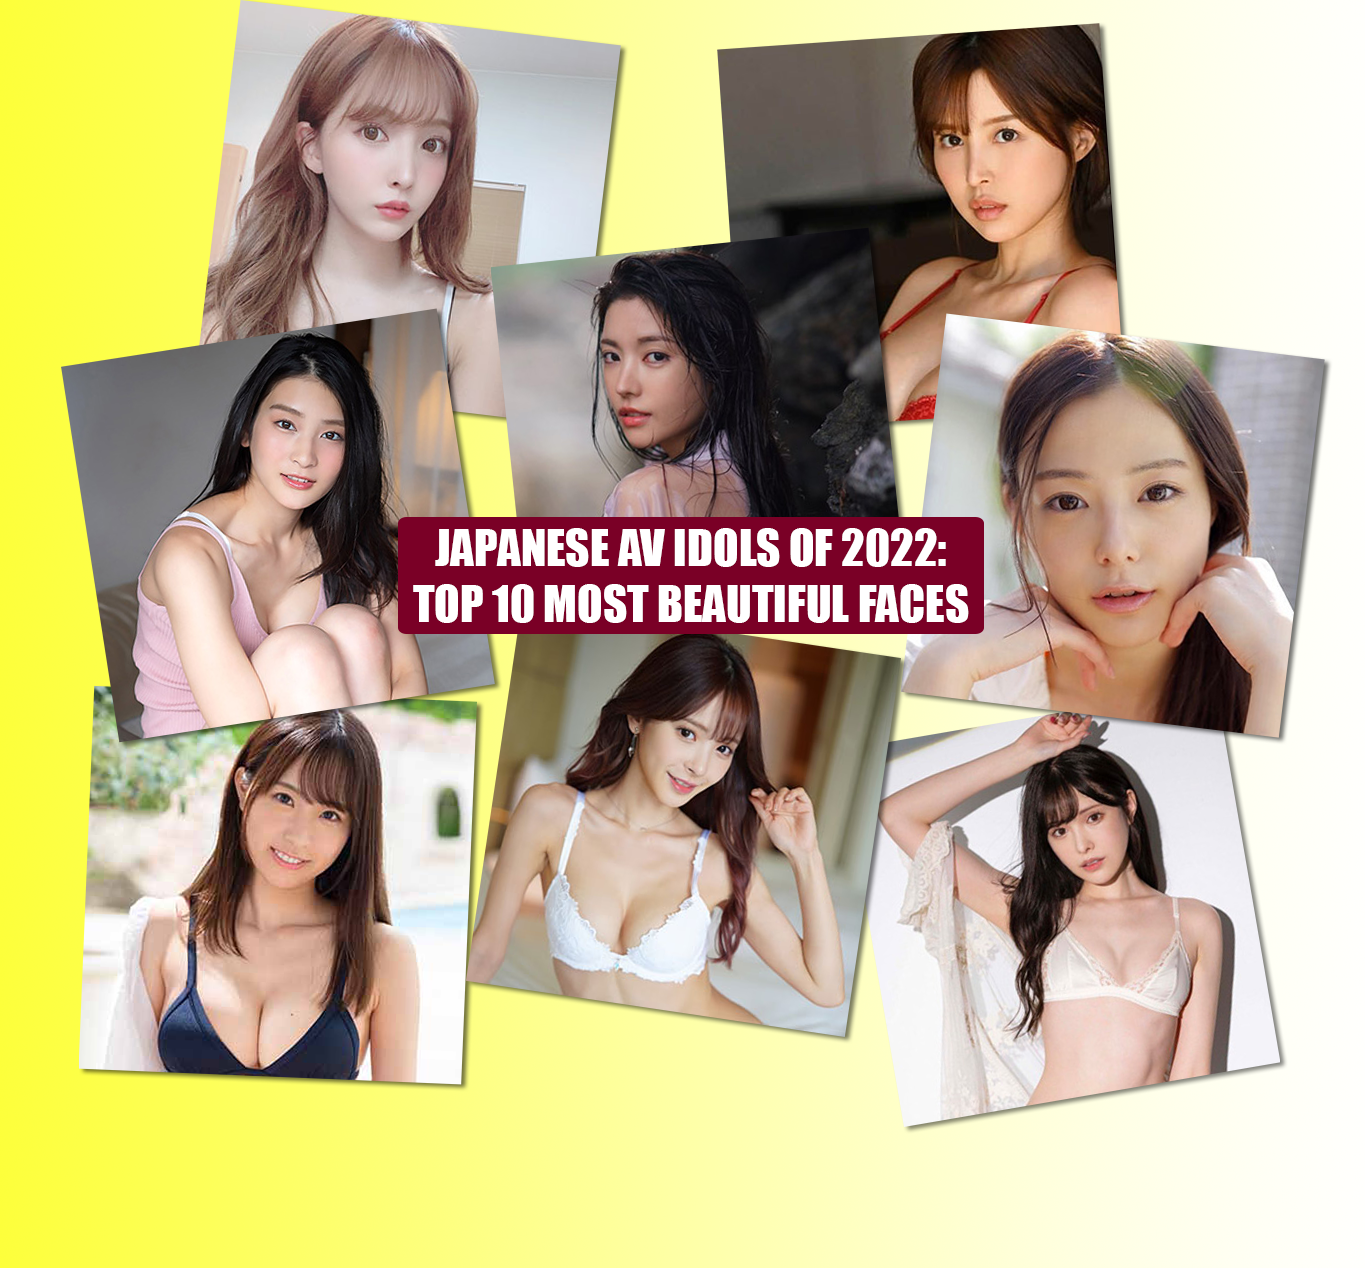 Top 10 Most Beautiful Faces for Japanese AV Entertainment Idols in 2022